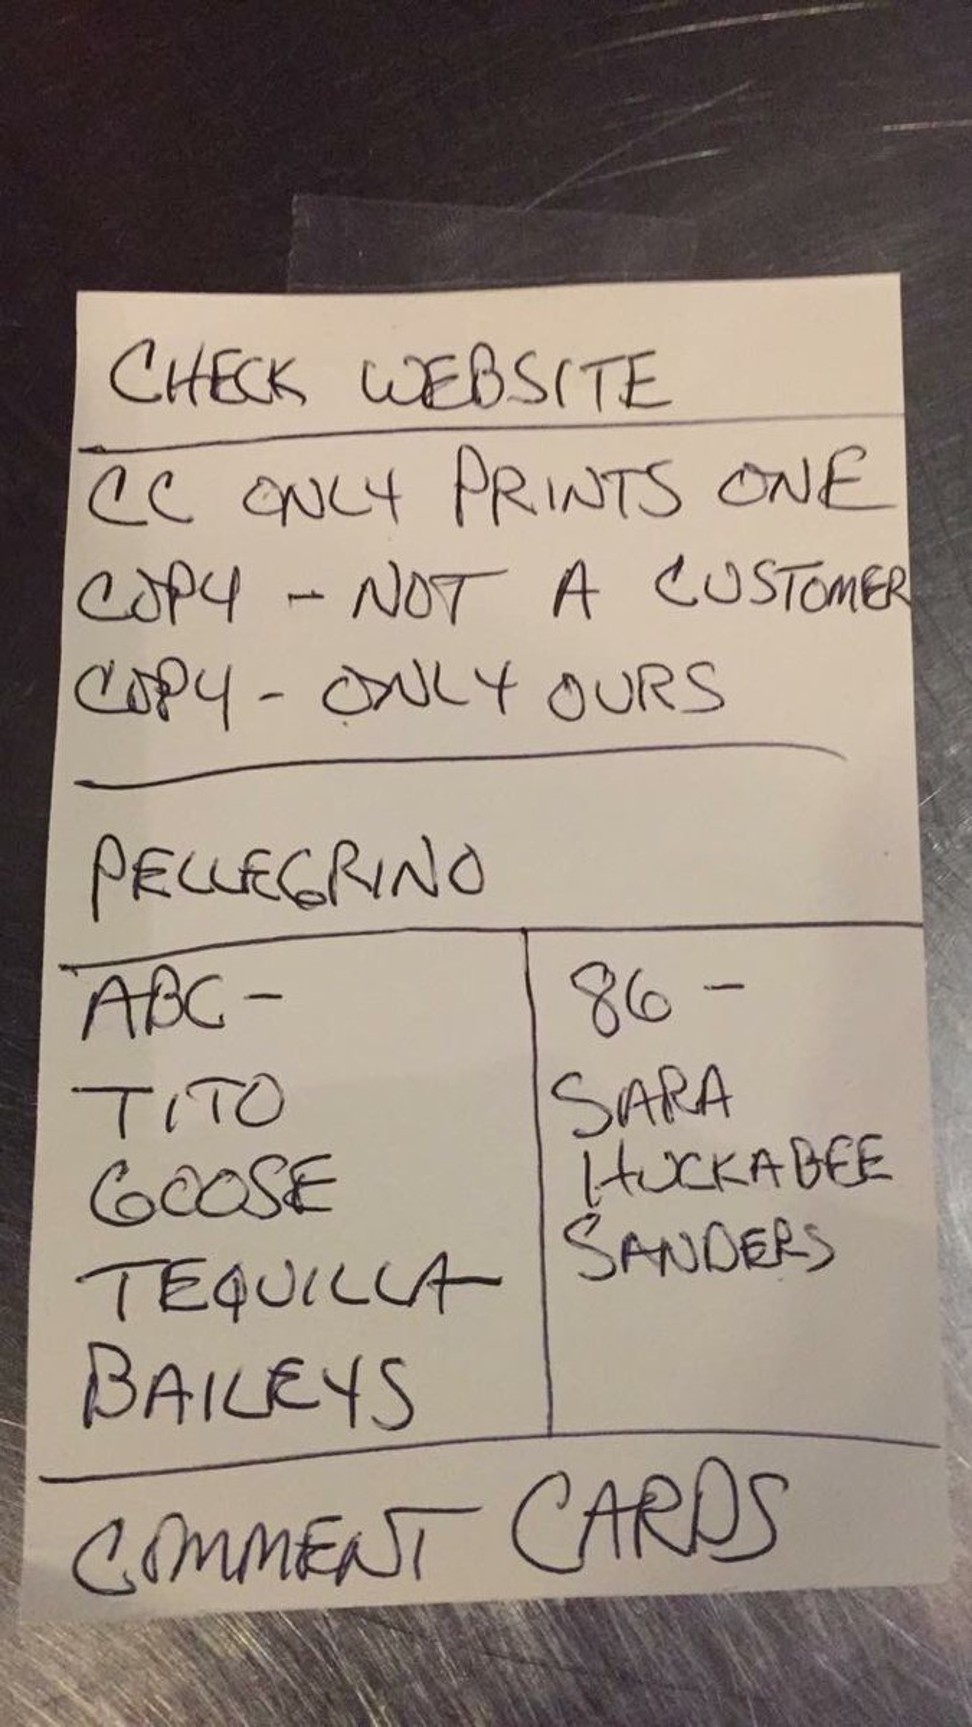 A handwritten note which read ‘86 - Sara Huckabee Sanders’, supposedly from the Red Hen restaurant that asked US President Donald Trump's spokeswoman to leave. To ‘86’ someone is a slang term meaning to refuse to serve a customer. Photo: Facebook